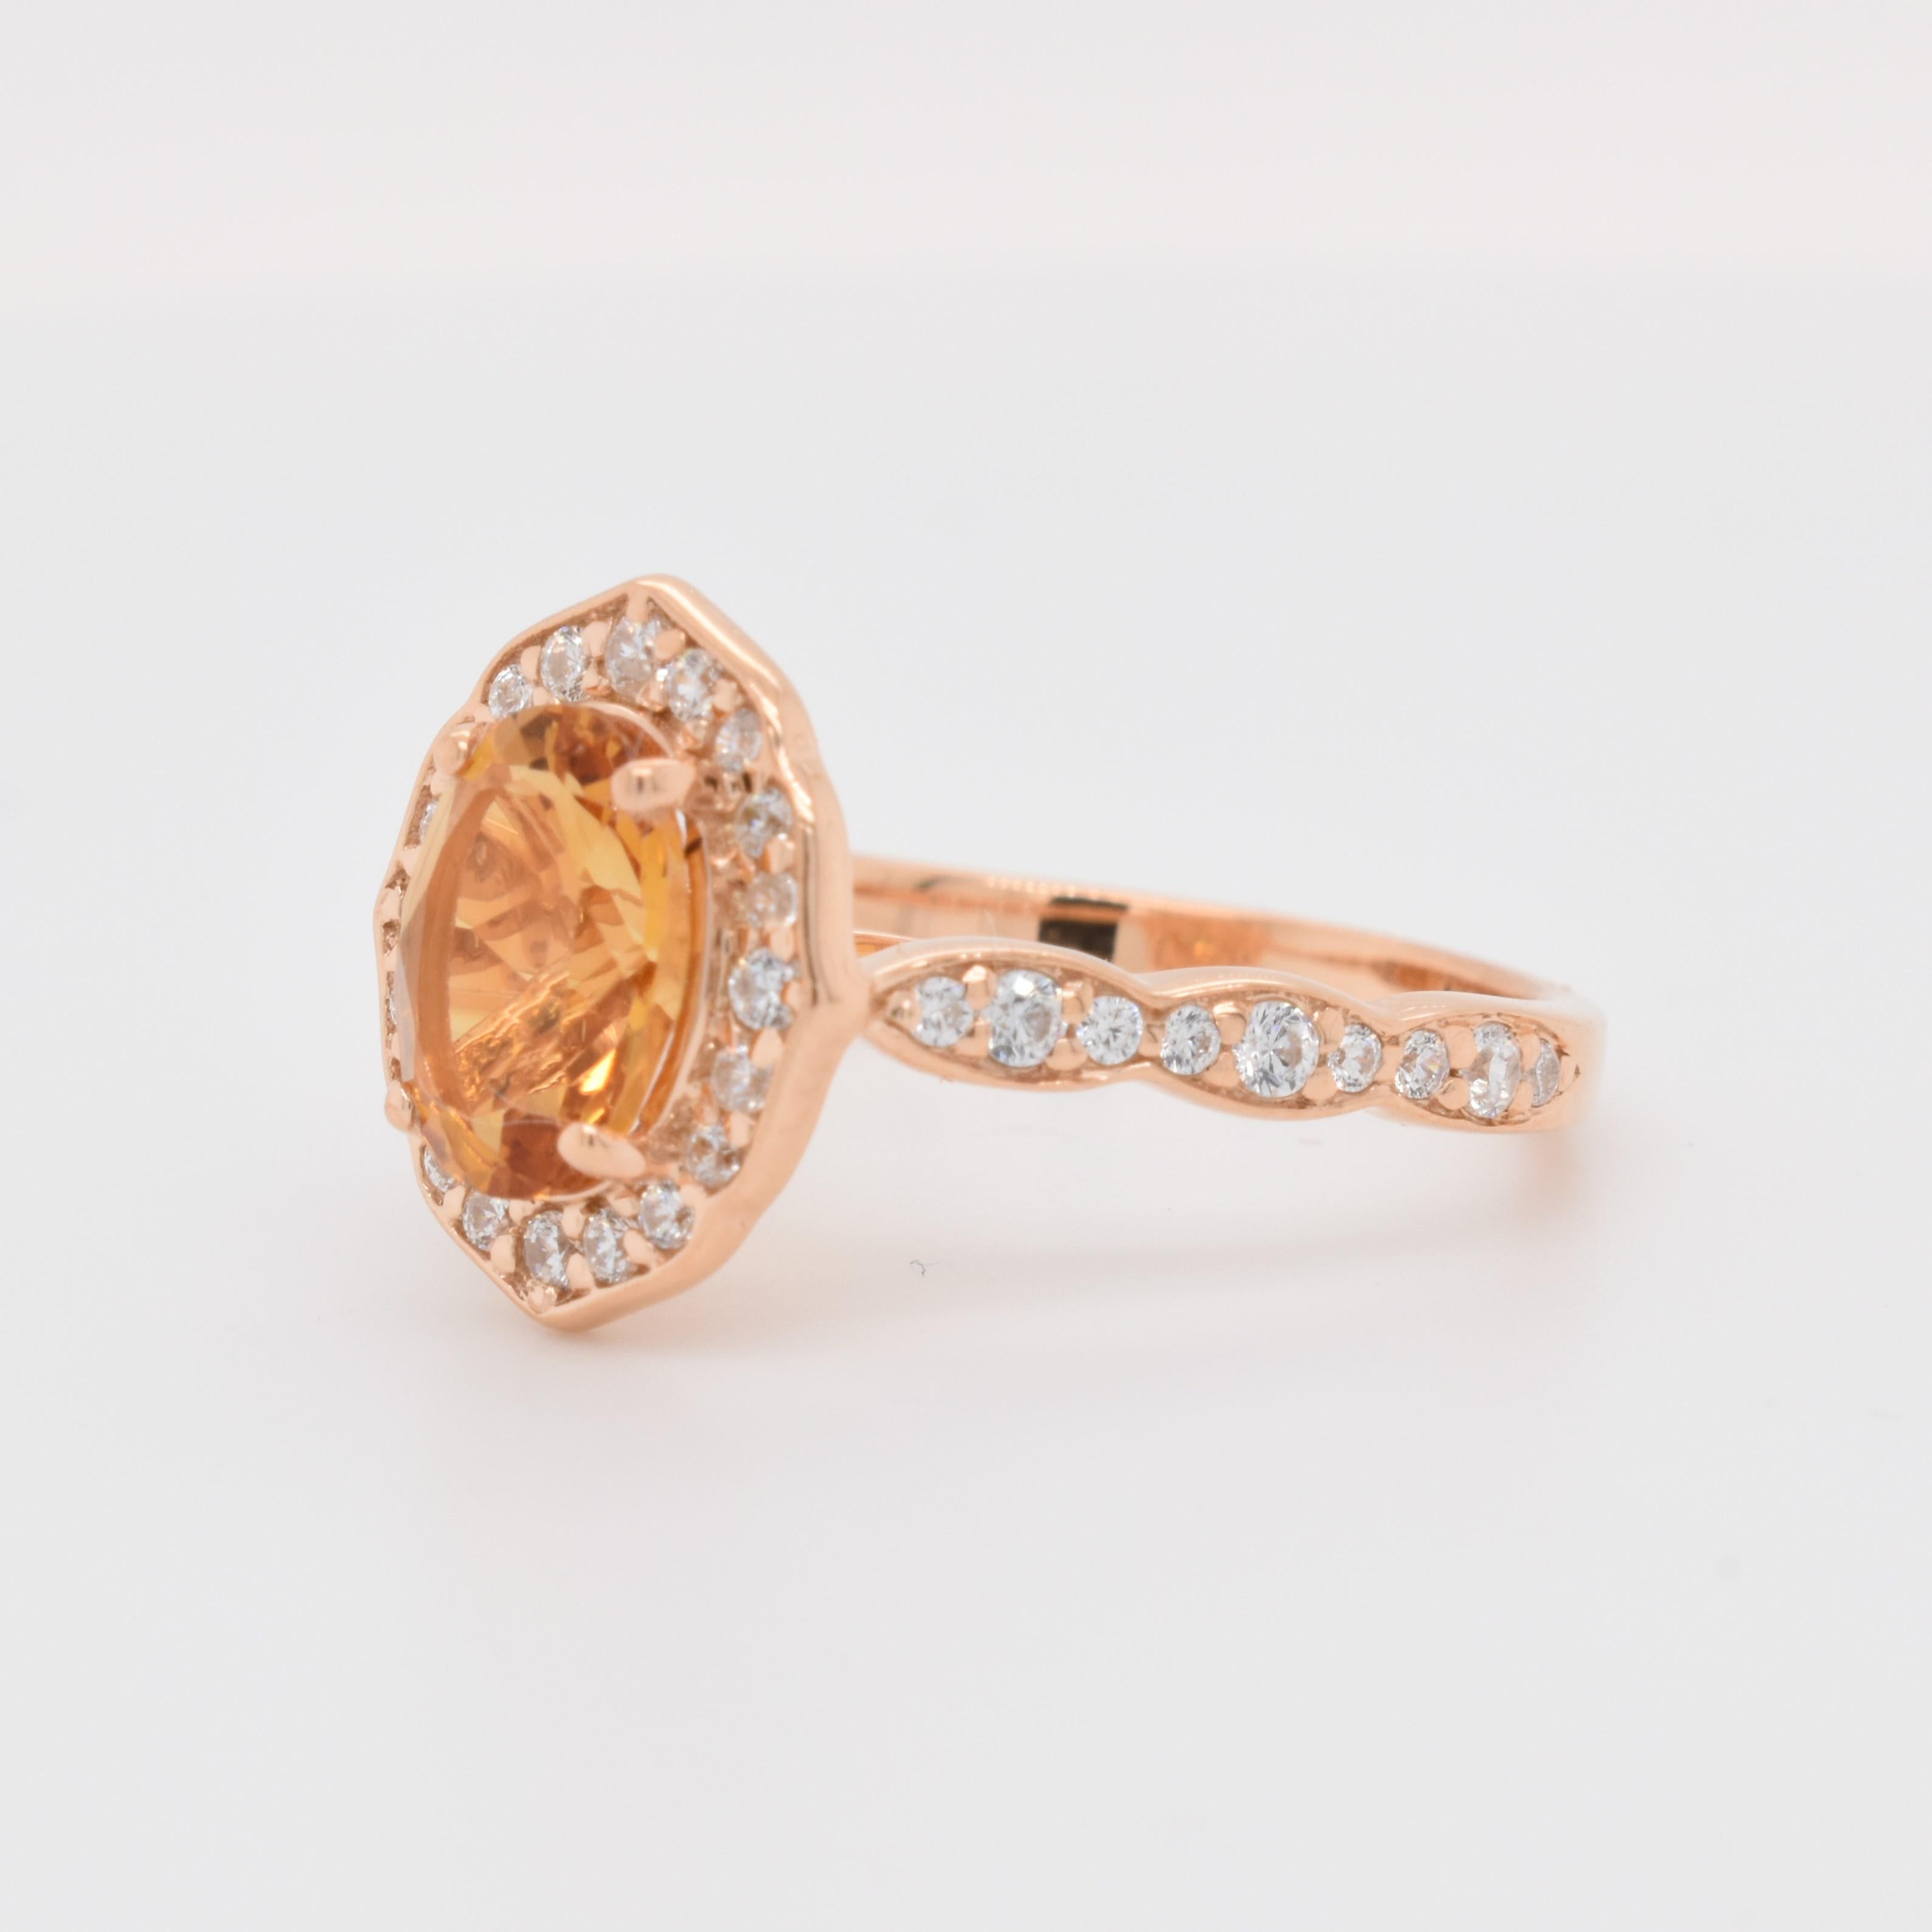 Oval Shape Citrine Gemstone beautifully crafted with CZ in a Ring. A fiery Yellow Color November Birthstone. For a special occasion like Engagement or Proposal or may be as a gift for a special person.

Primary Stone Size - 8x6mm